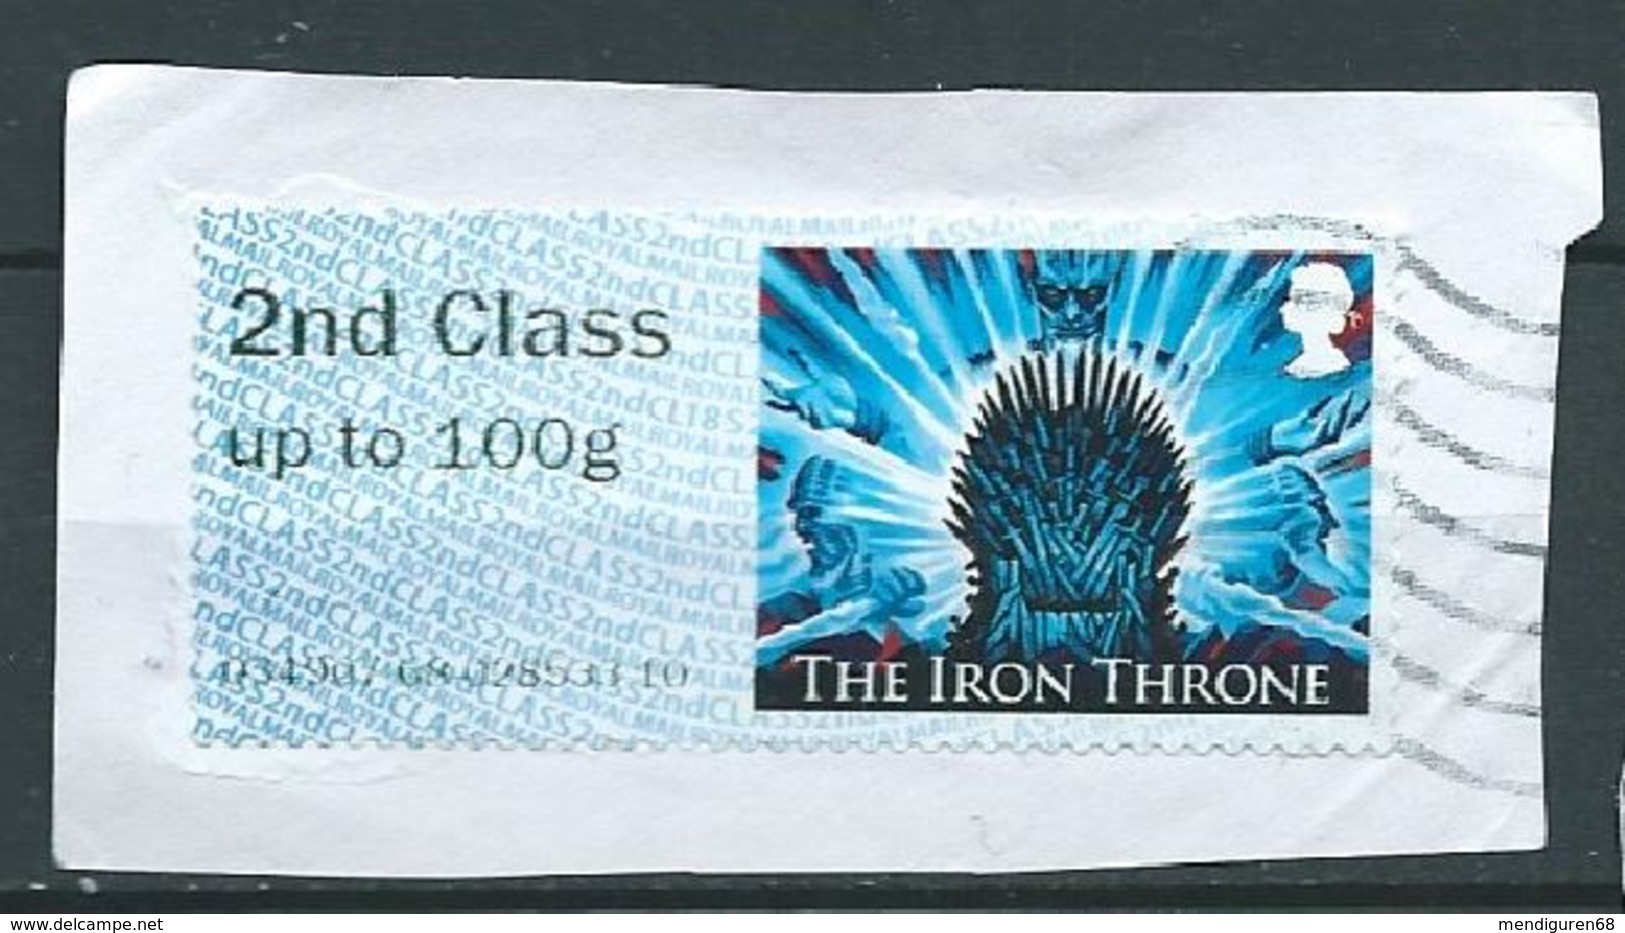 GROSSBRITANNIEN GRANDE BRETAGNE POST & GO 2018 GAME OF THRONES: HE IRON THRONE ICE 2Nd Class Up To 100g SG FS199 MI AT13 - Post & Go (automaten)